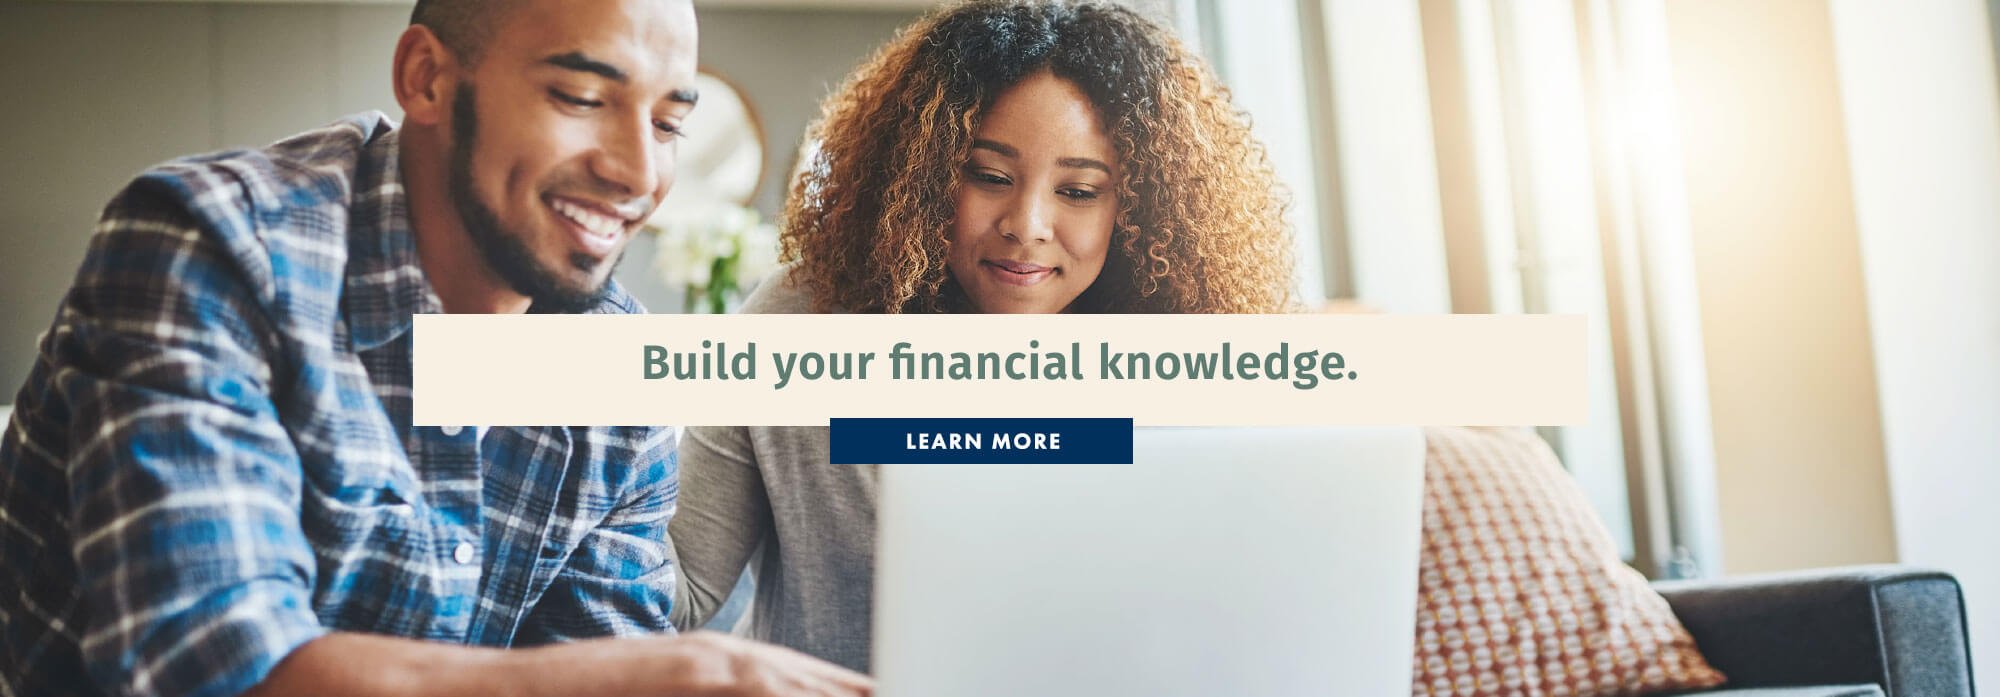 Build your financial knowledge